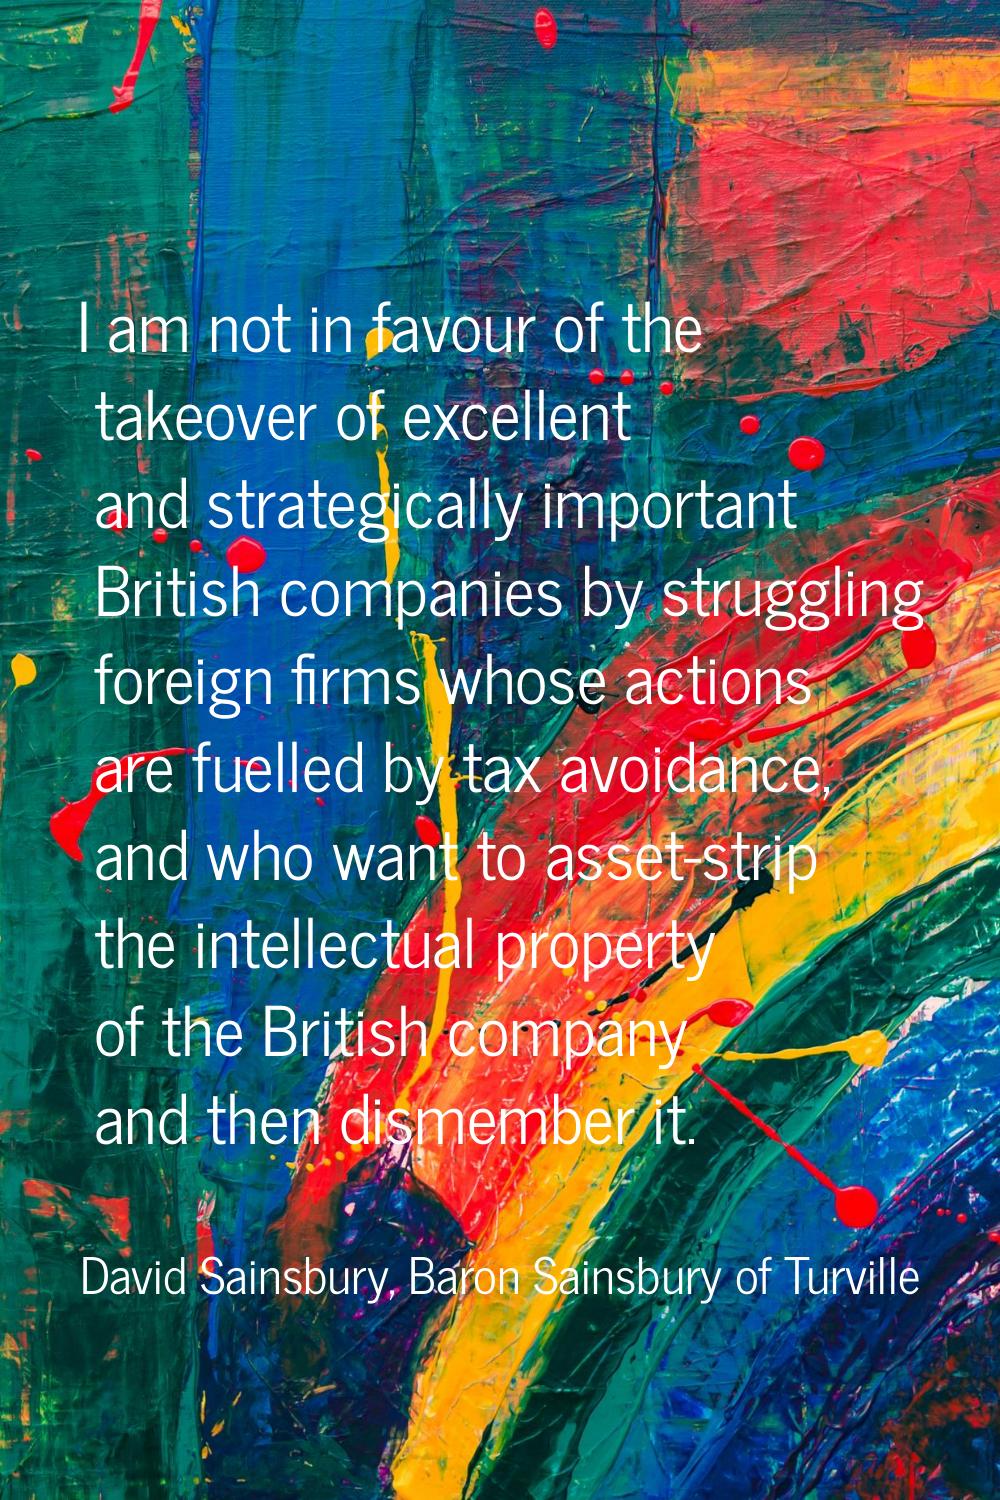 I am not in favour of the takeover of excellent and strategically important British companies by st